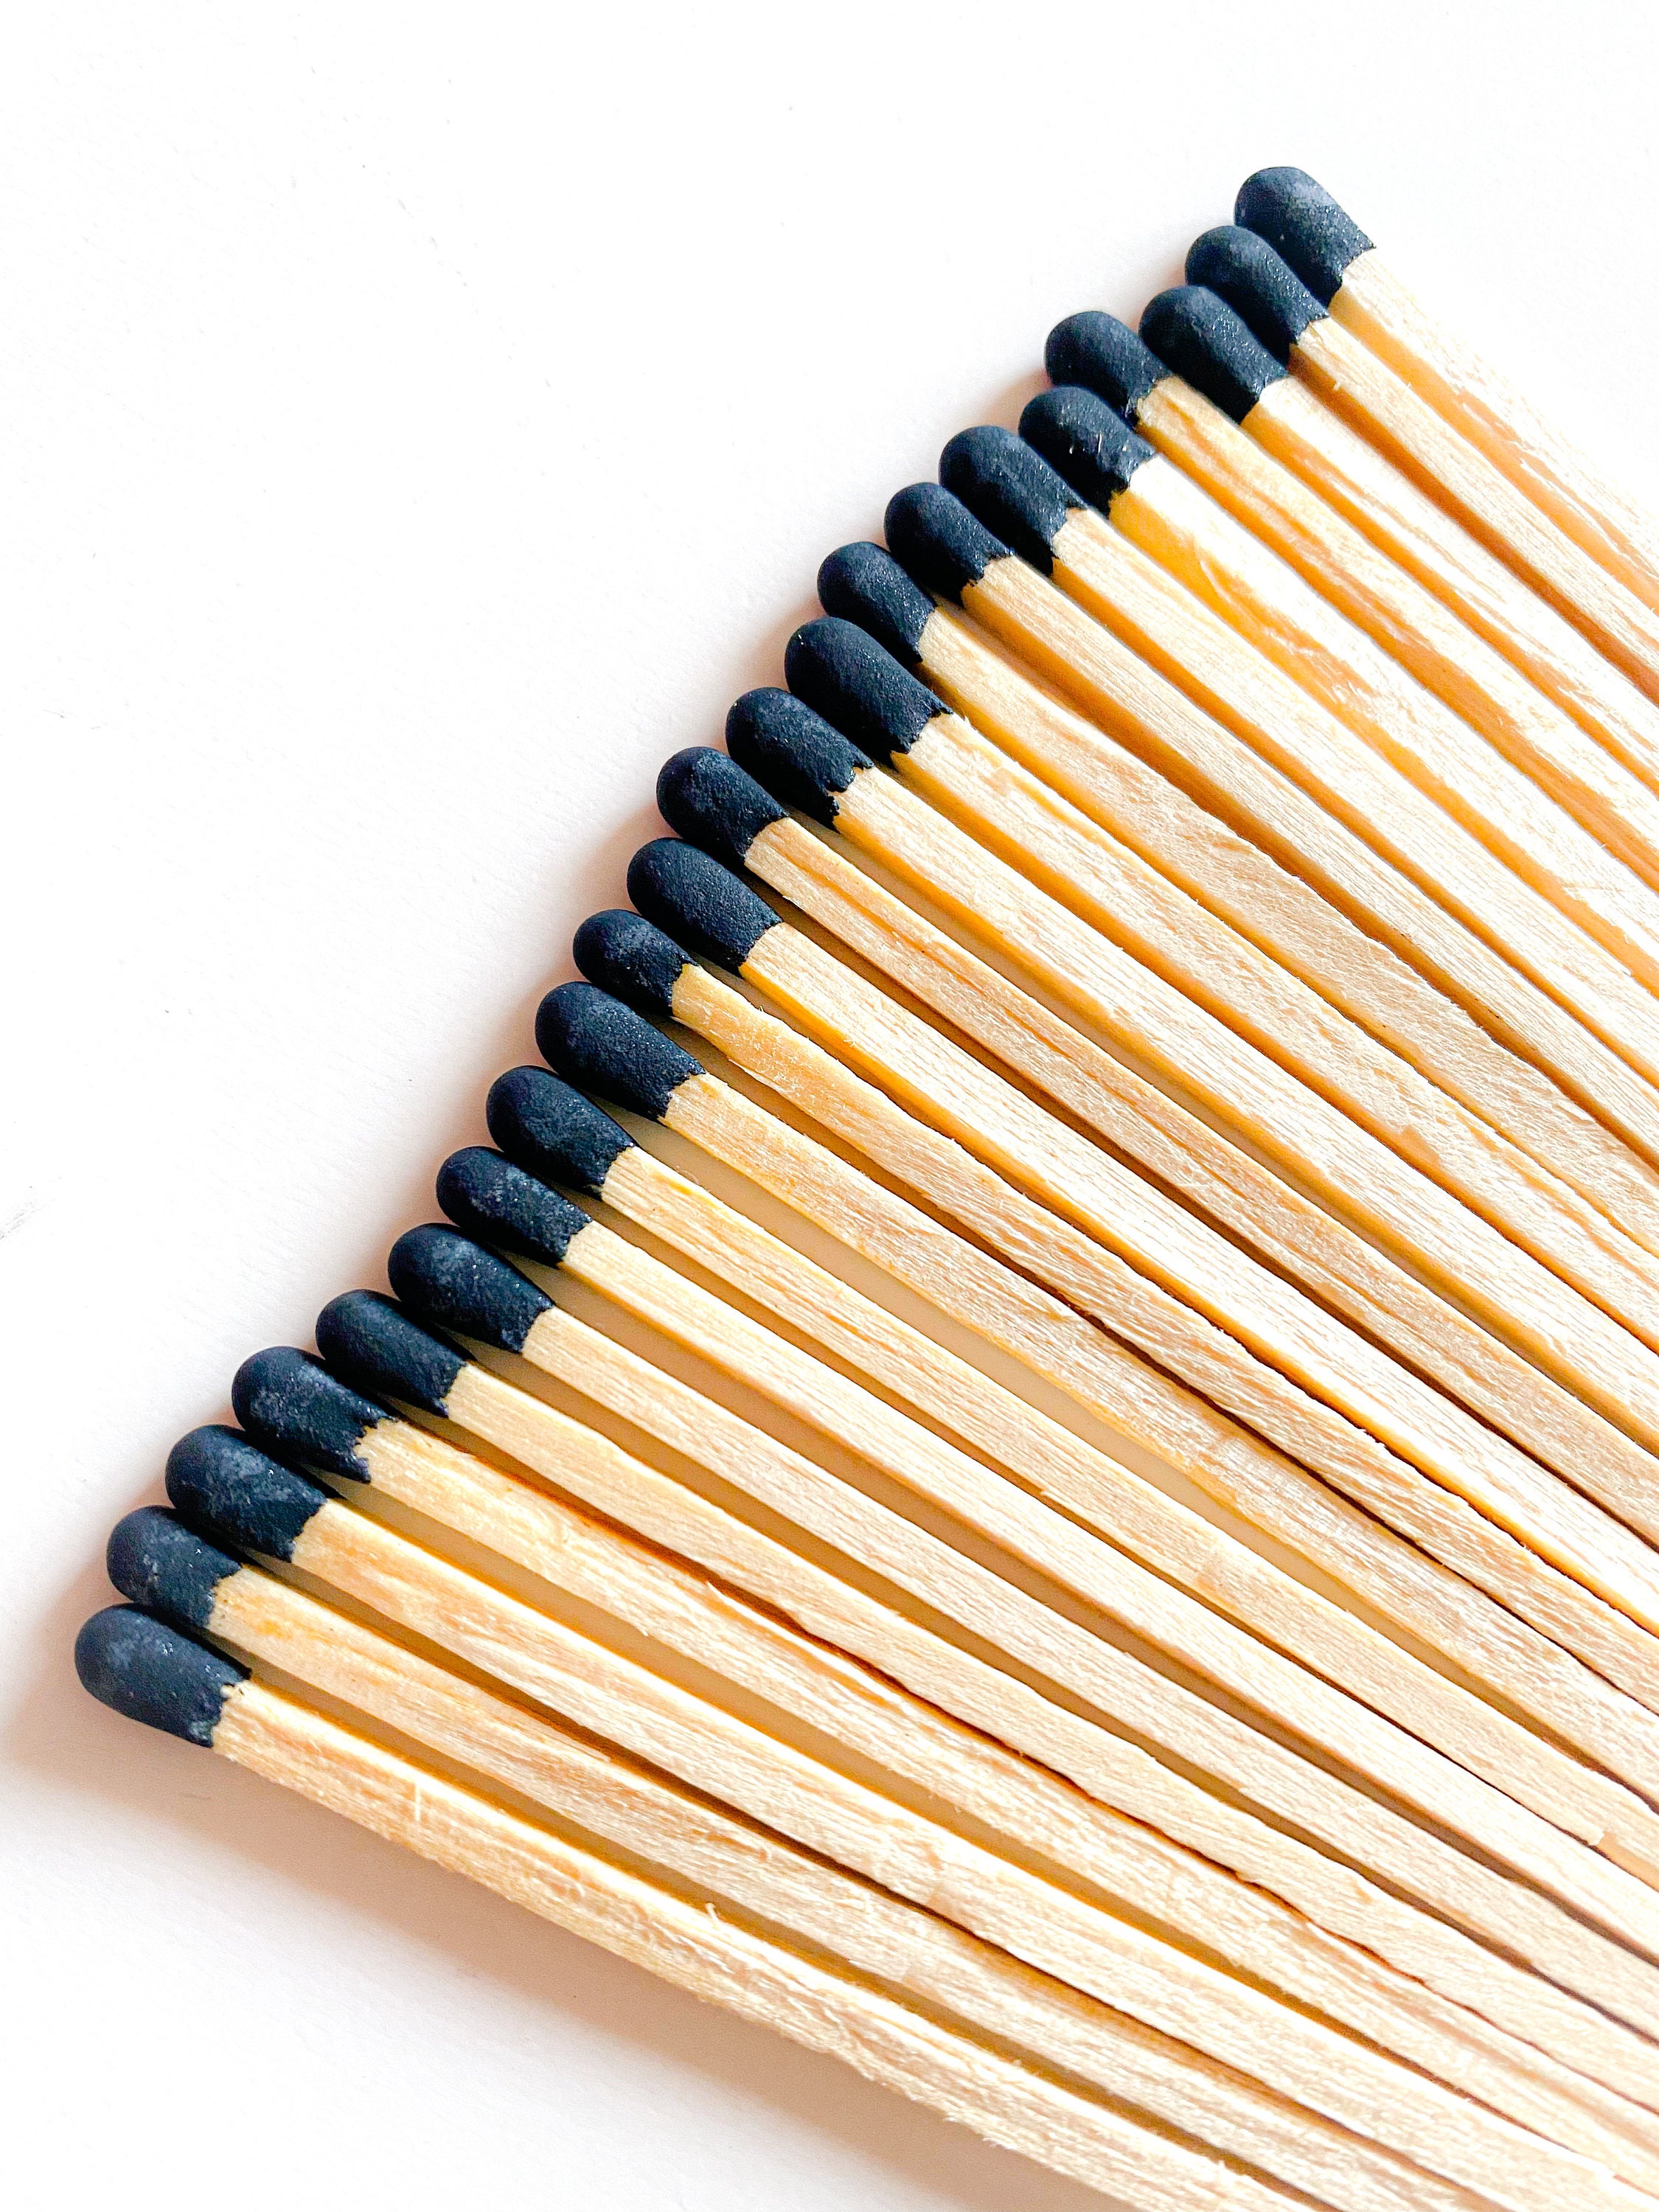 Bulk 3 Black Matches Colored Matches Candle Matches Long Matches